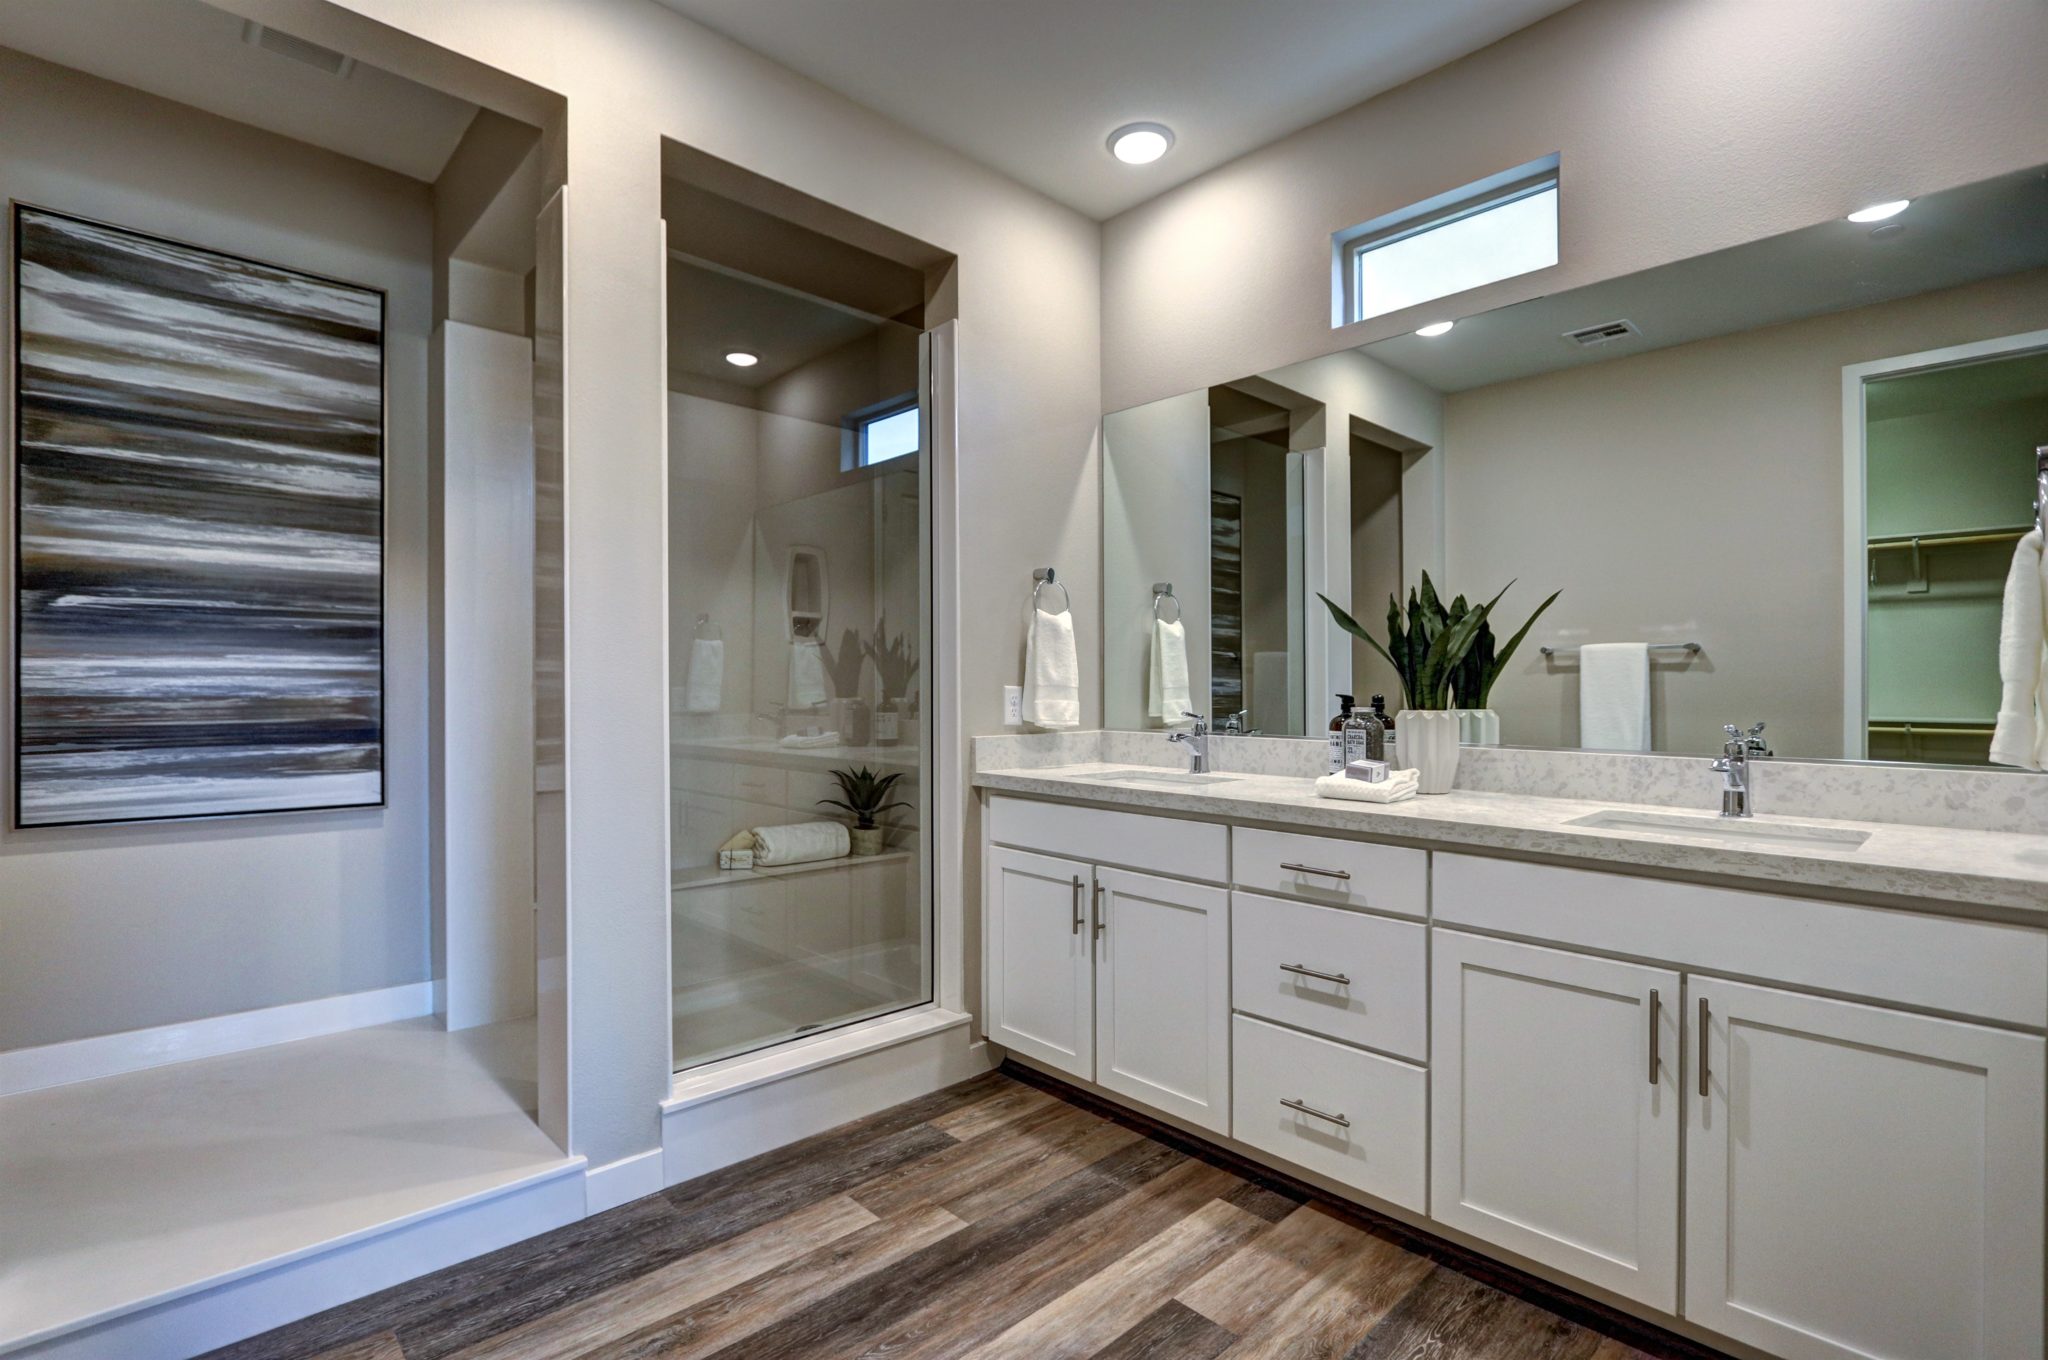 Master Bath in Reflect in Resort Collection in Trilogy by Shea Homes in South Square in Summerlin